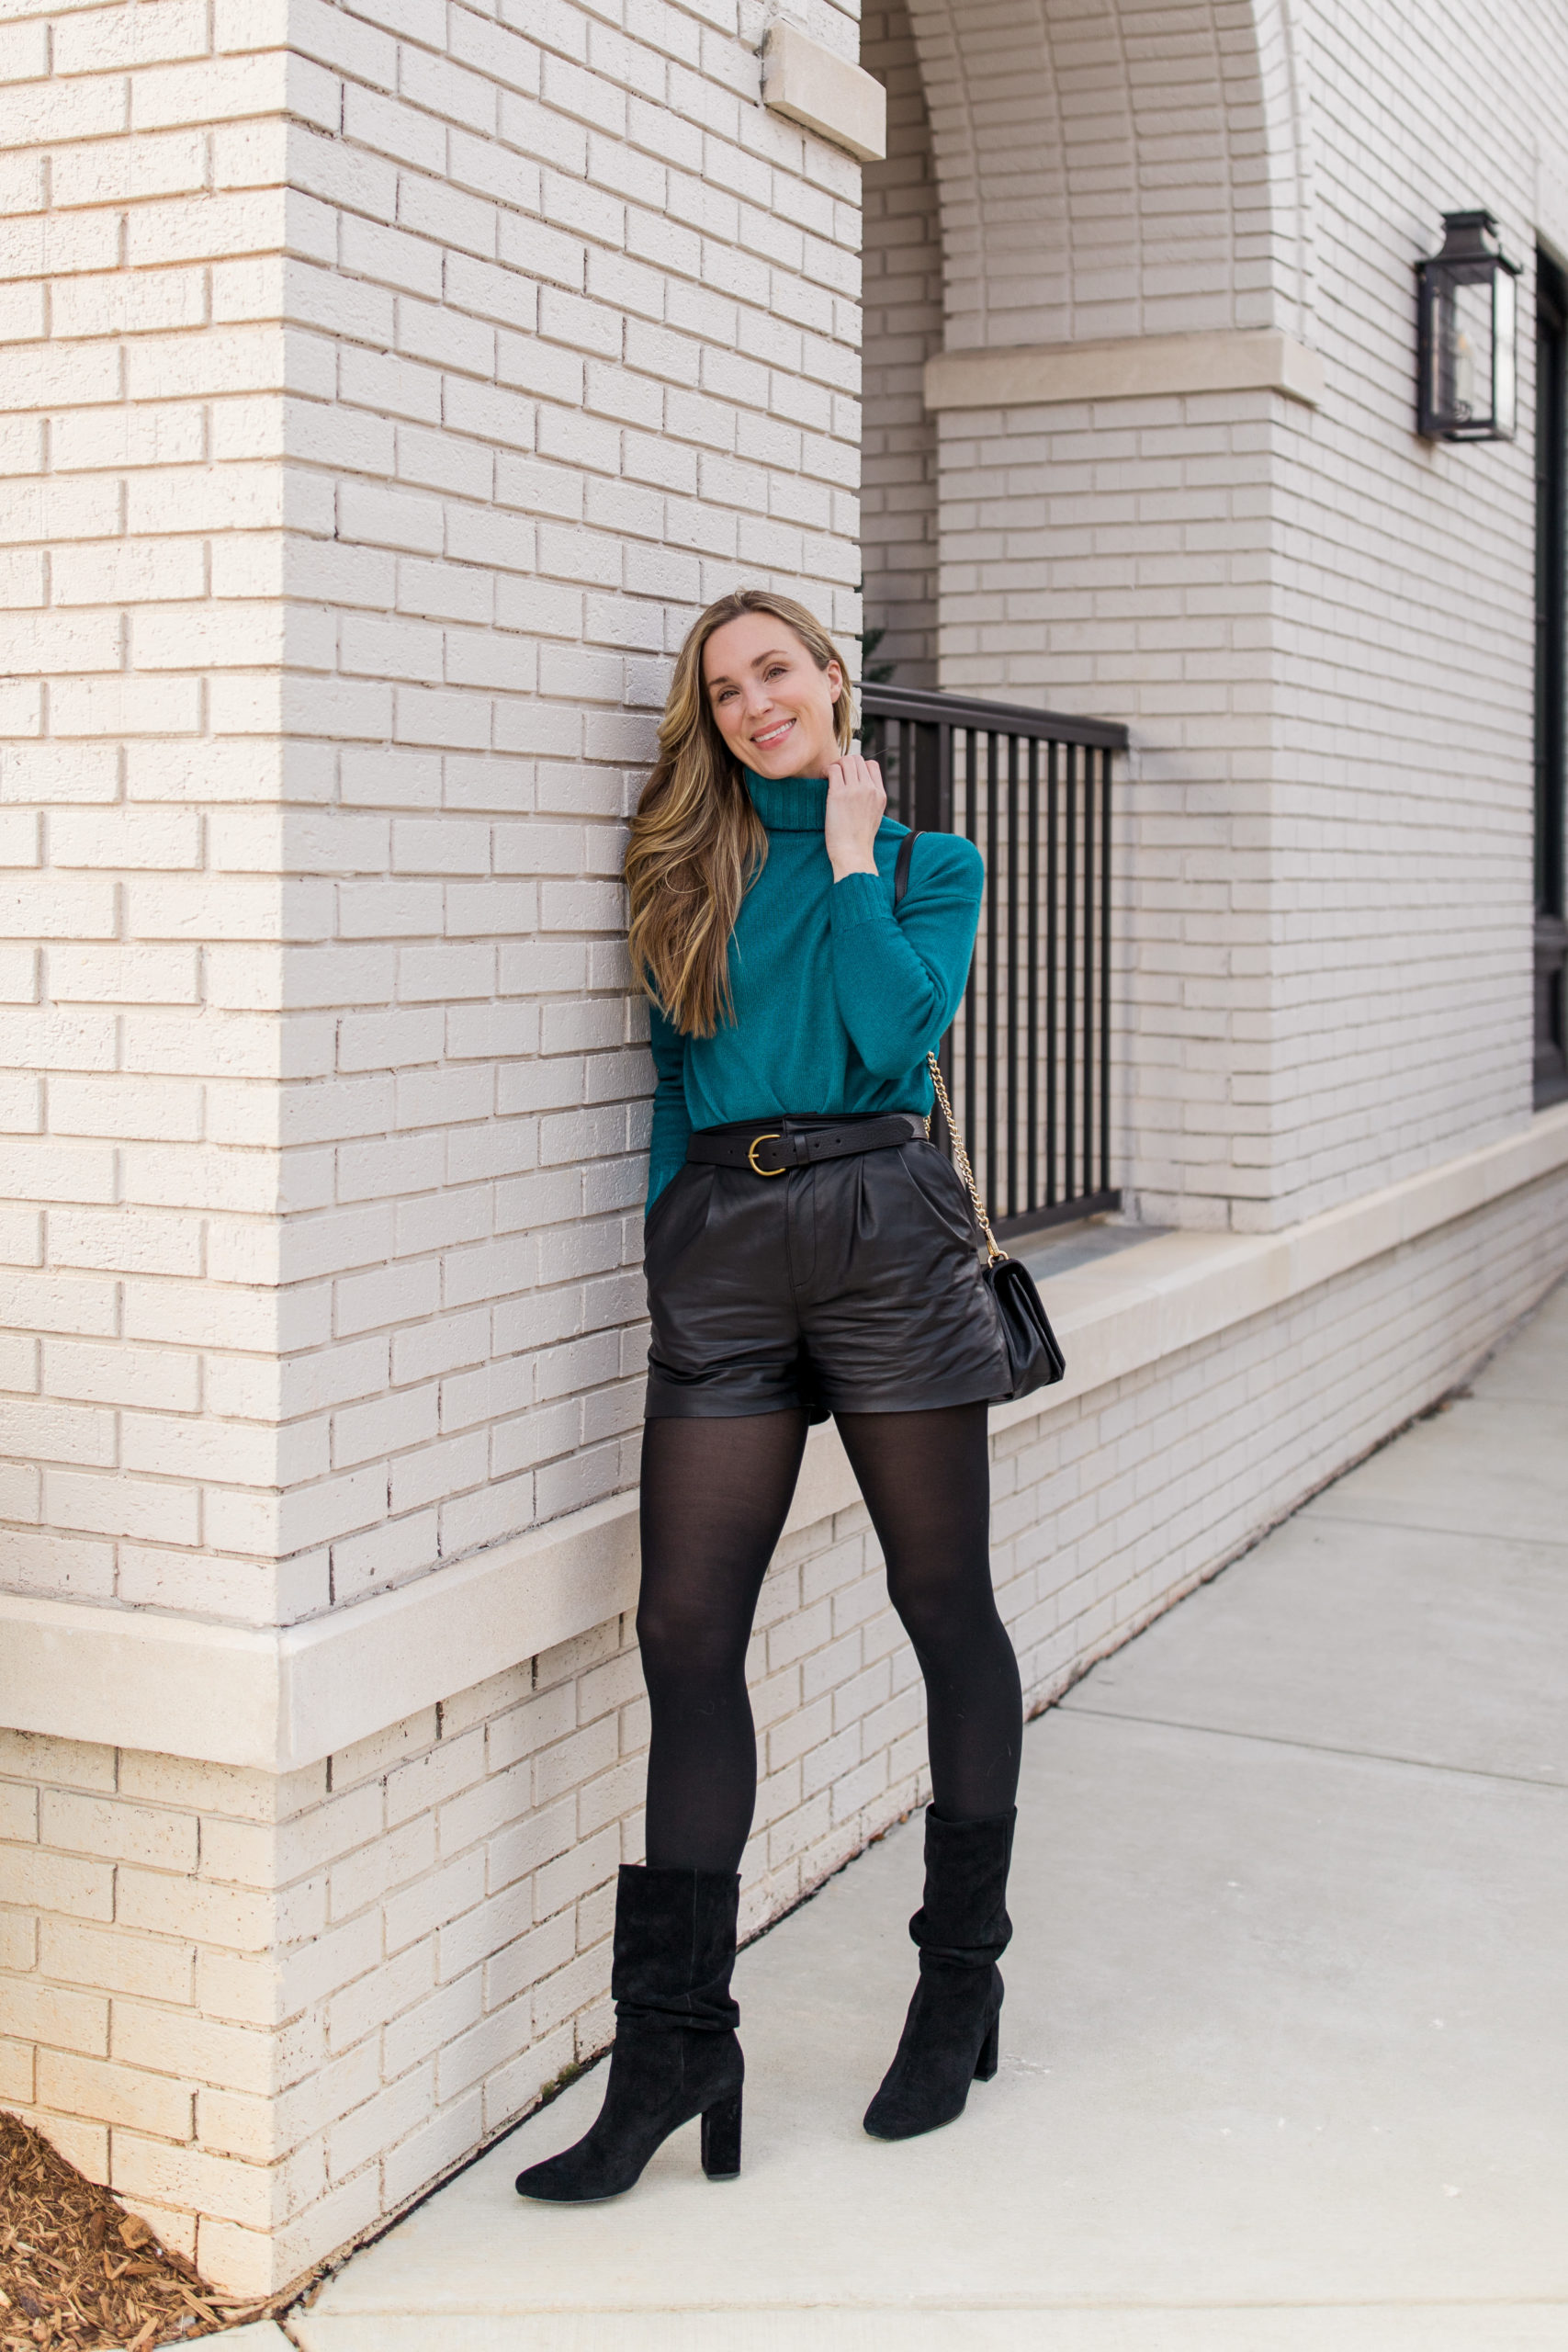 8 Classy Winter Date Night Outfit Ideas | Natalie Yerger